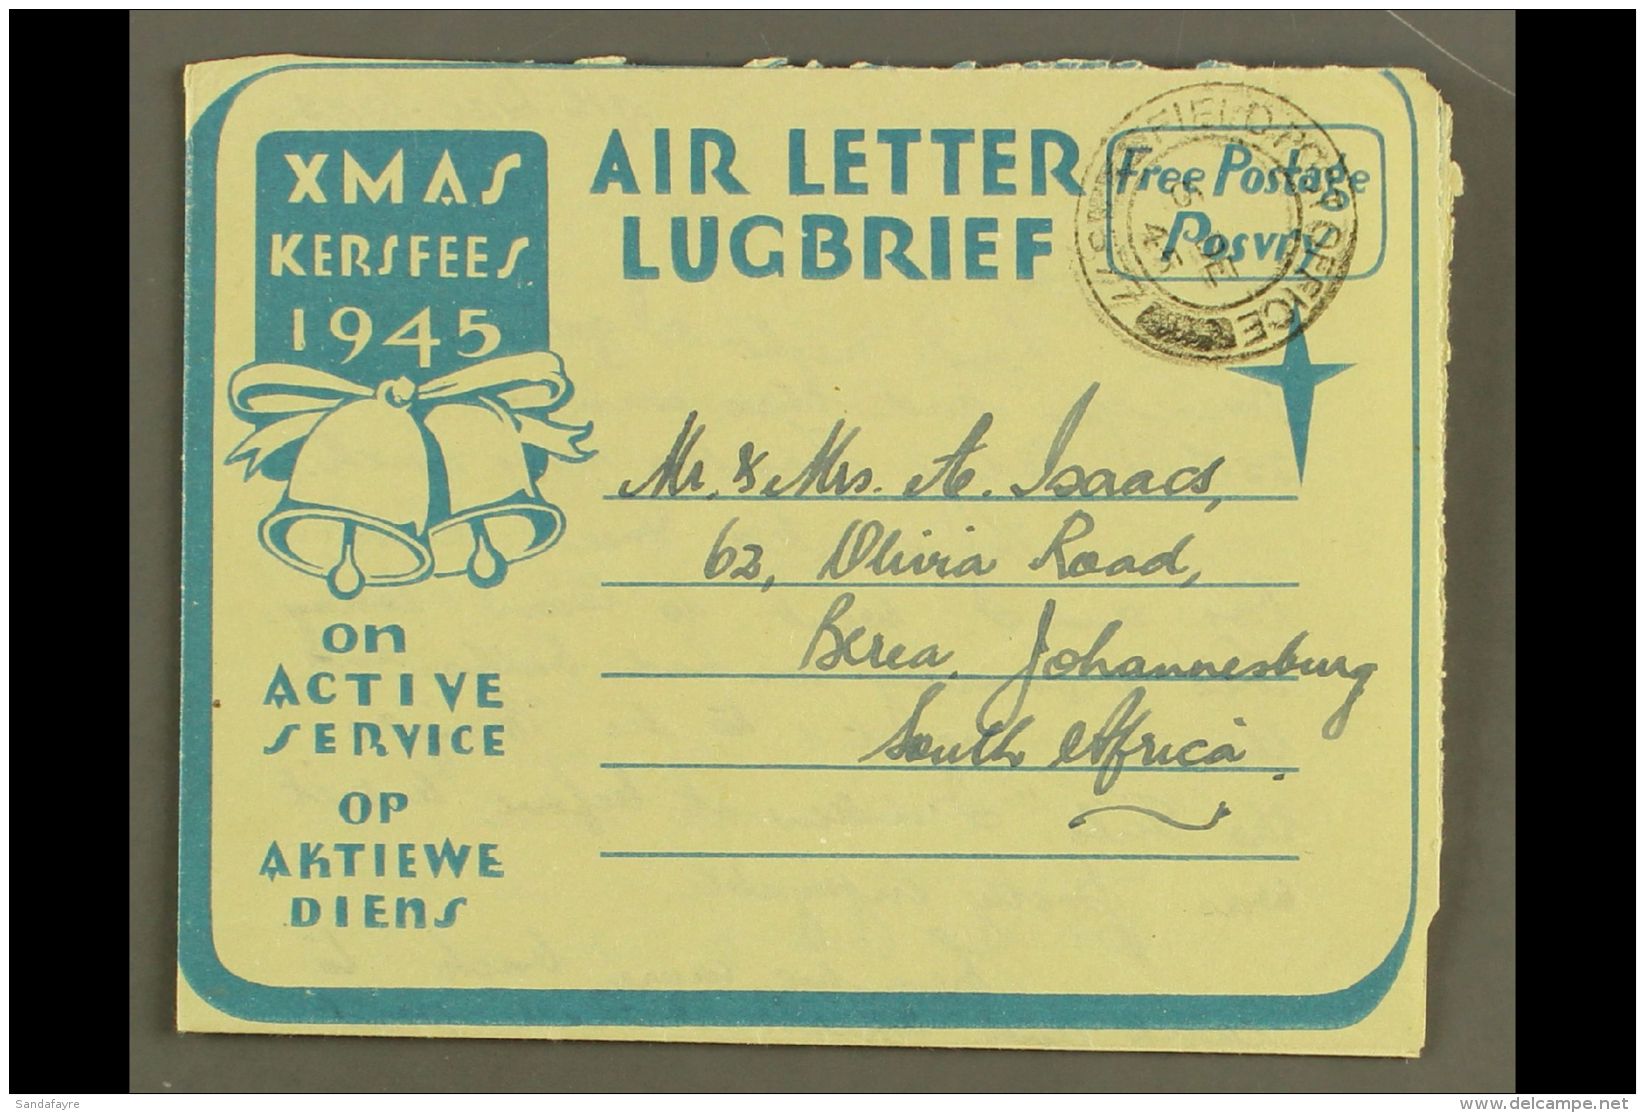 AEROGRAMME  1945 "Greetings From The North" Christmas Air Letter, Inscribed "Free Postage" For Serving Troops,... - Unclassified